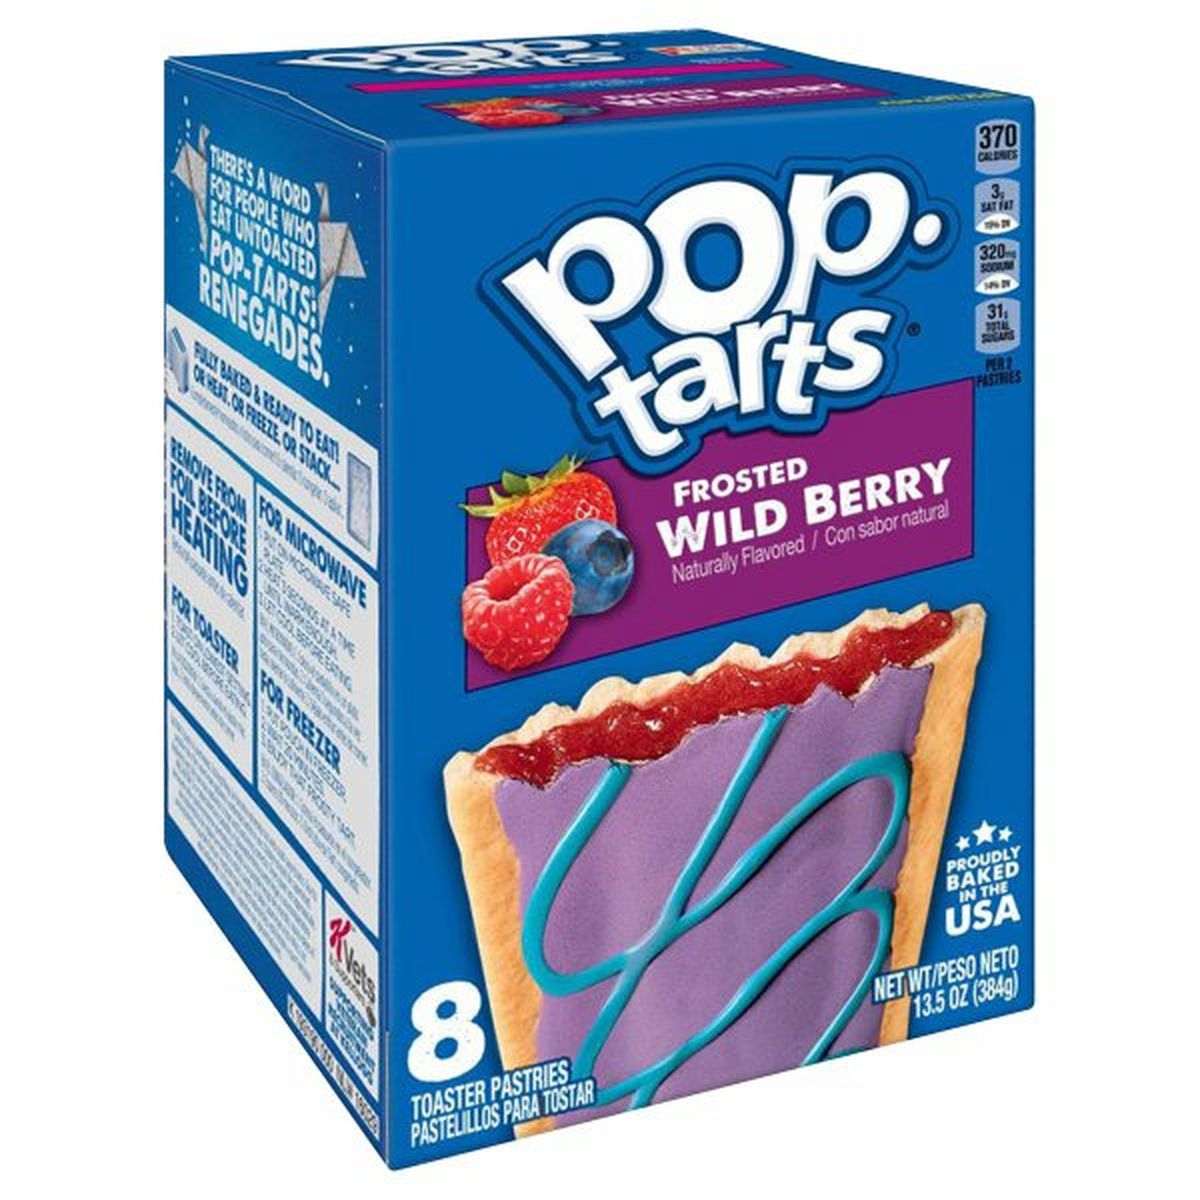 Calories in Kellogg's Pop-Tarts Toaster Pastries Breakfast Toaster Pastries, Frosted Wild Berry, Proudly Baked in the USA